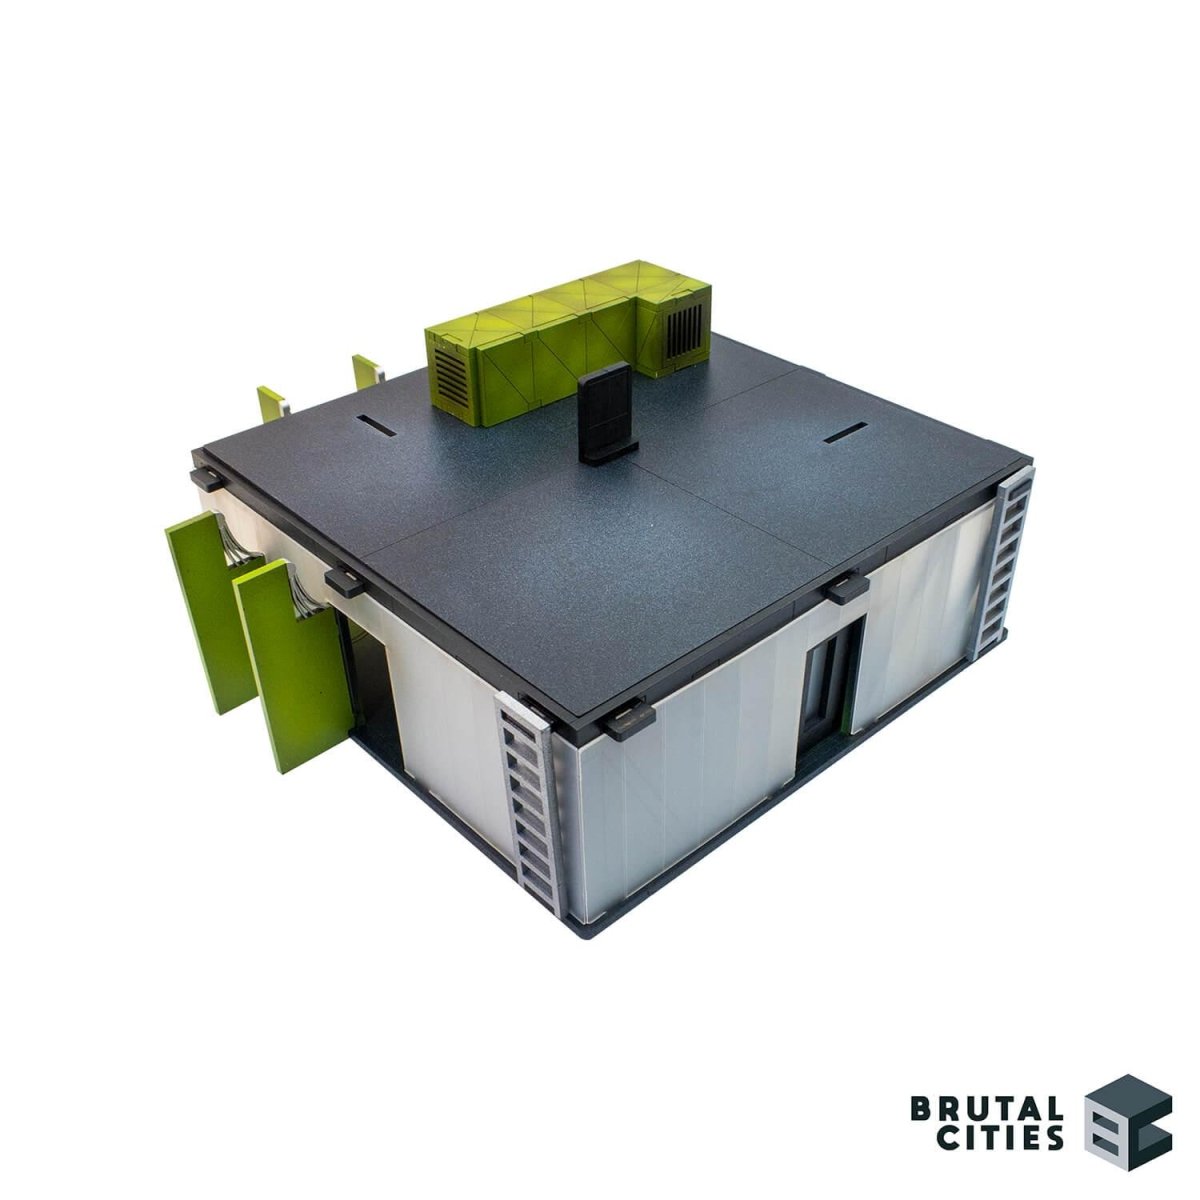 Sci-fi Infinity objective room terrain building painted black - square building with ladders and ducting.